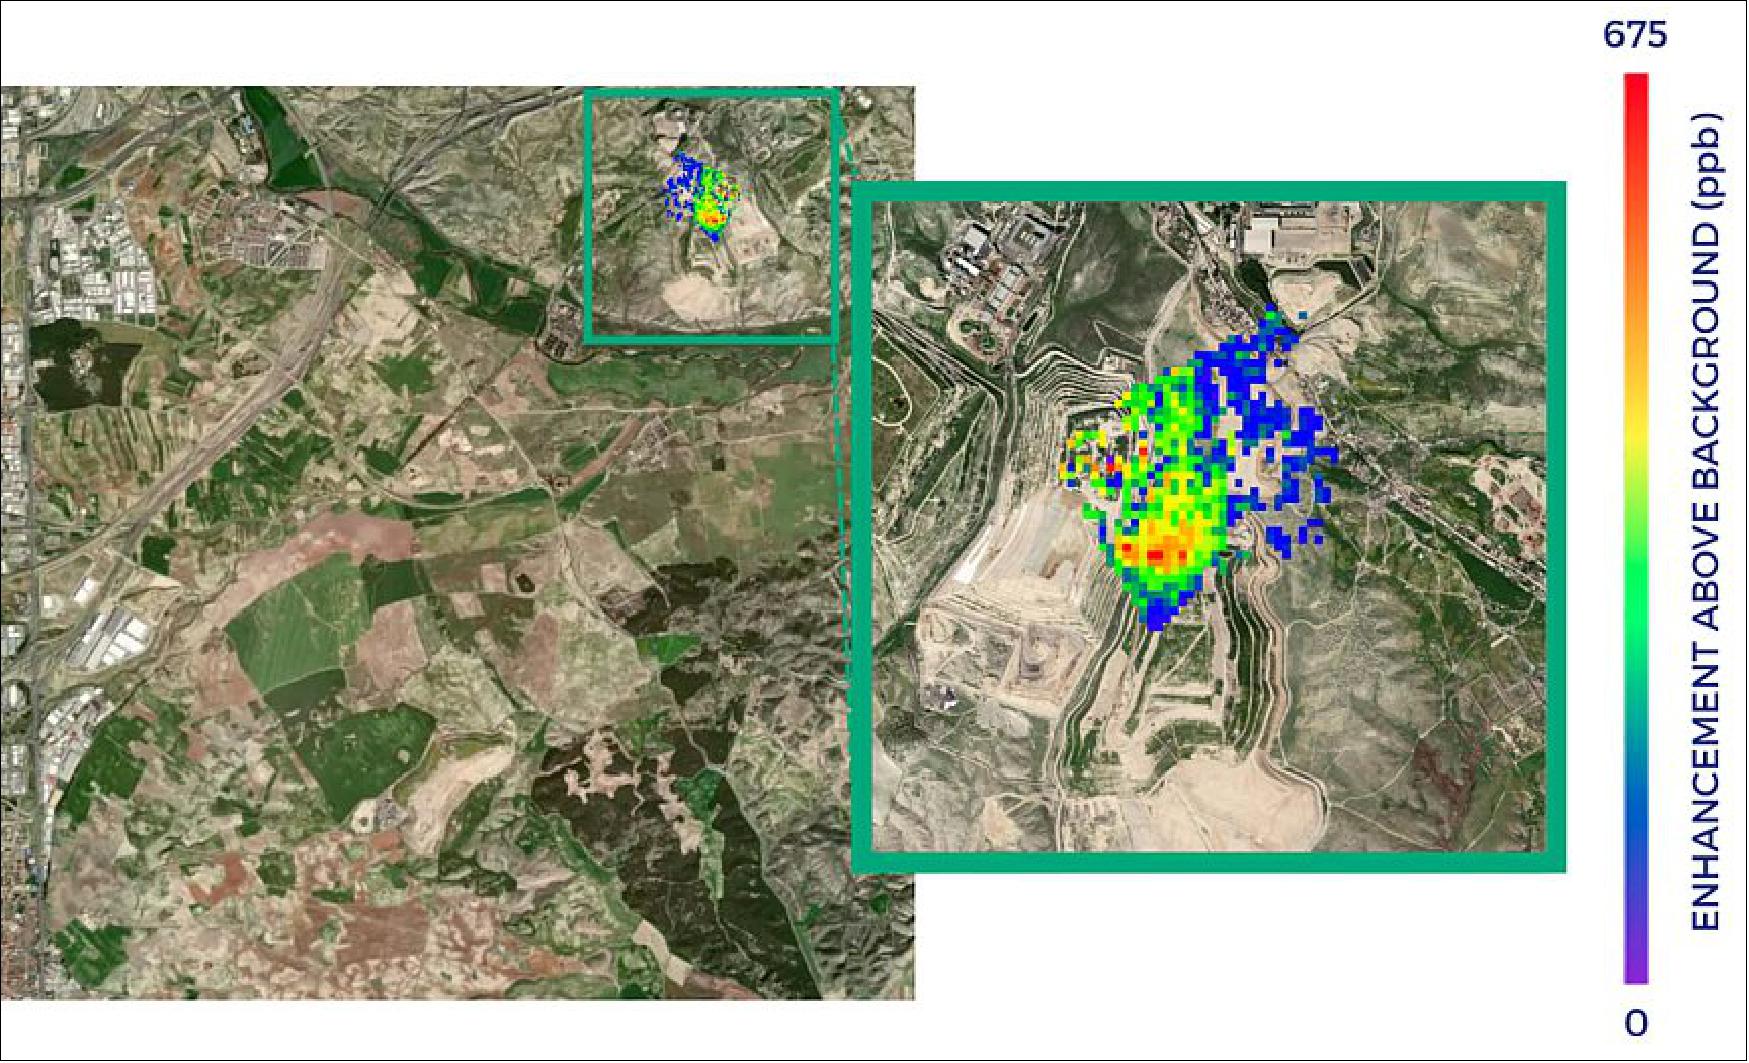 Figure 11: Methane emissions detected from Madrid landfill by by GHGSat. The image shows the methane emissions from one of the landfill sites in Madrid on 20 August 2021 (image credit: GHGSat)